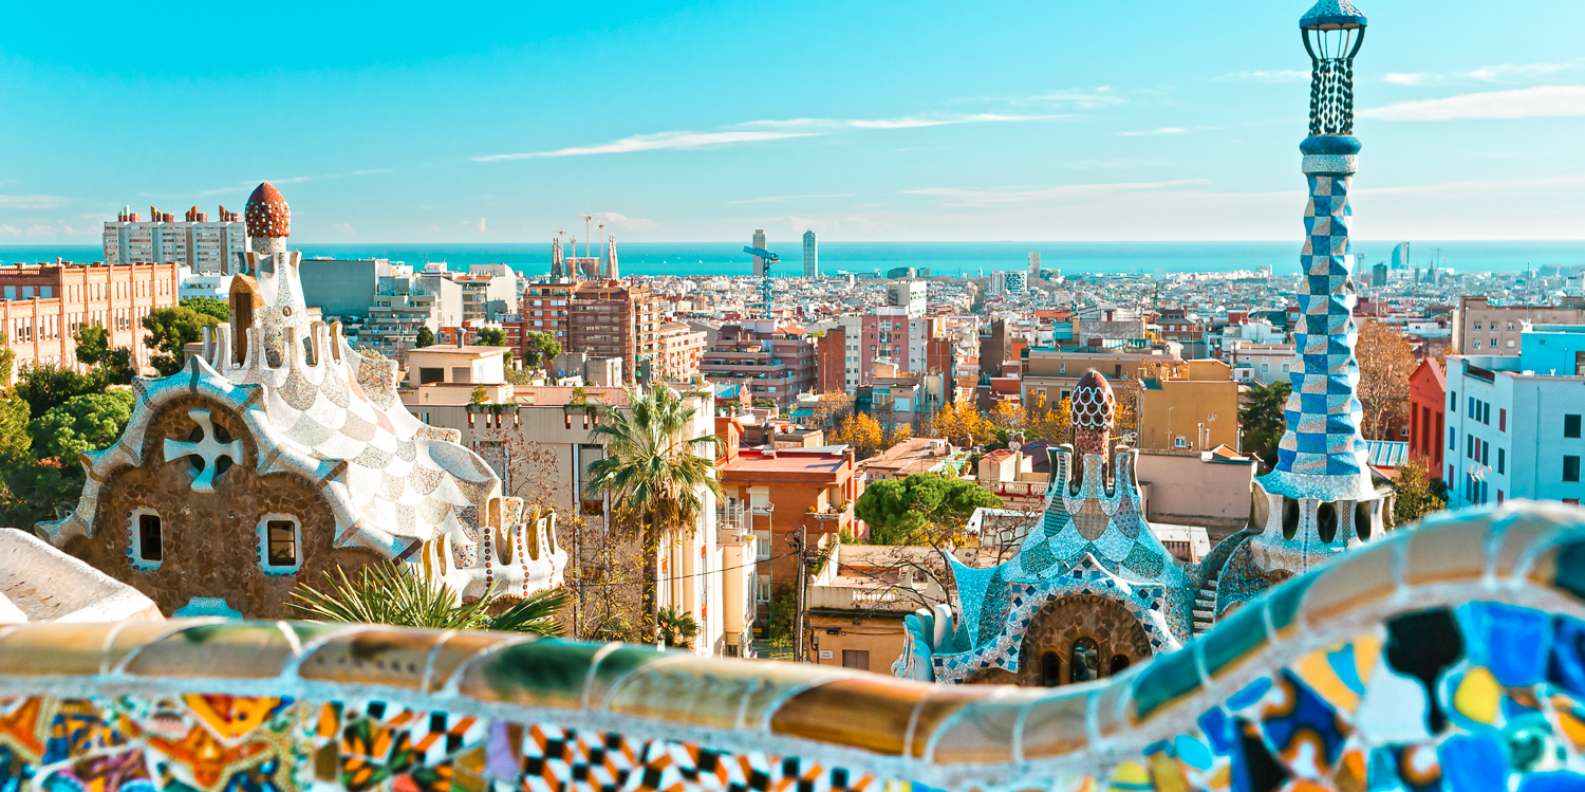 Colourful image of Barcelona